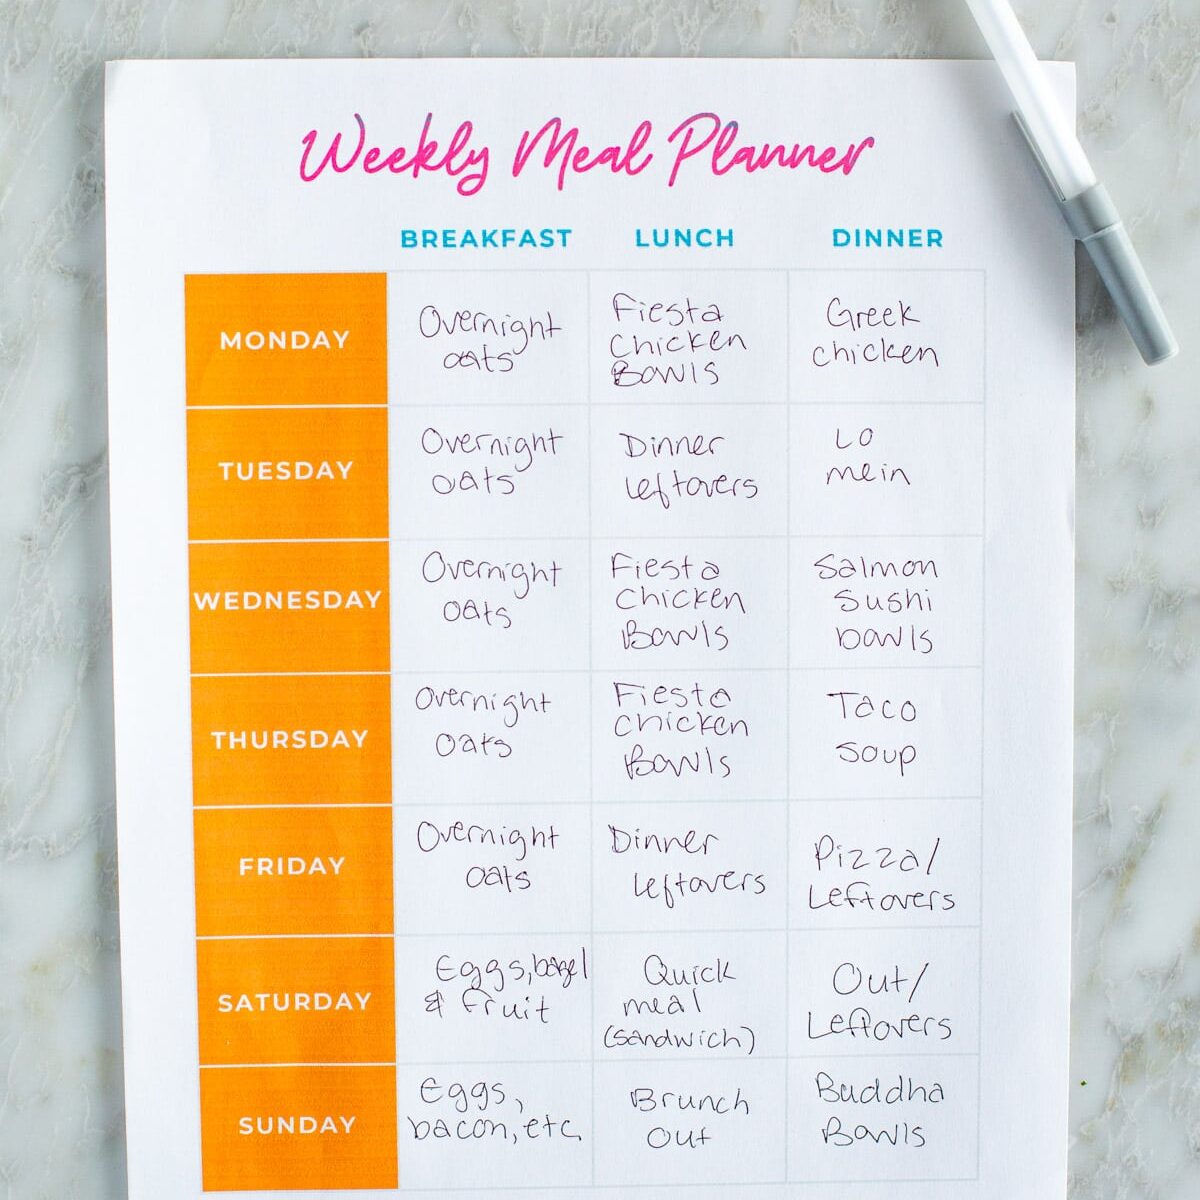 A filled out meal planner template.